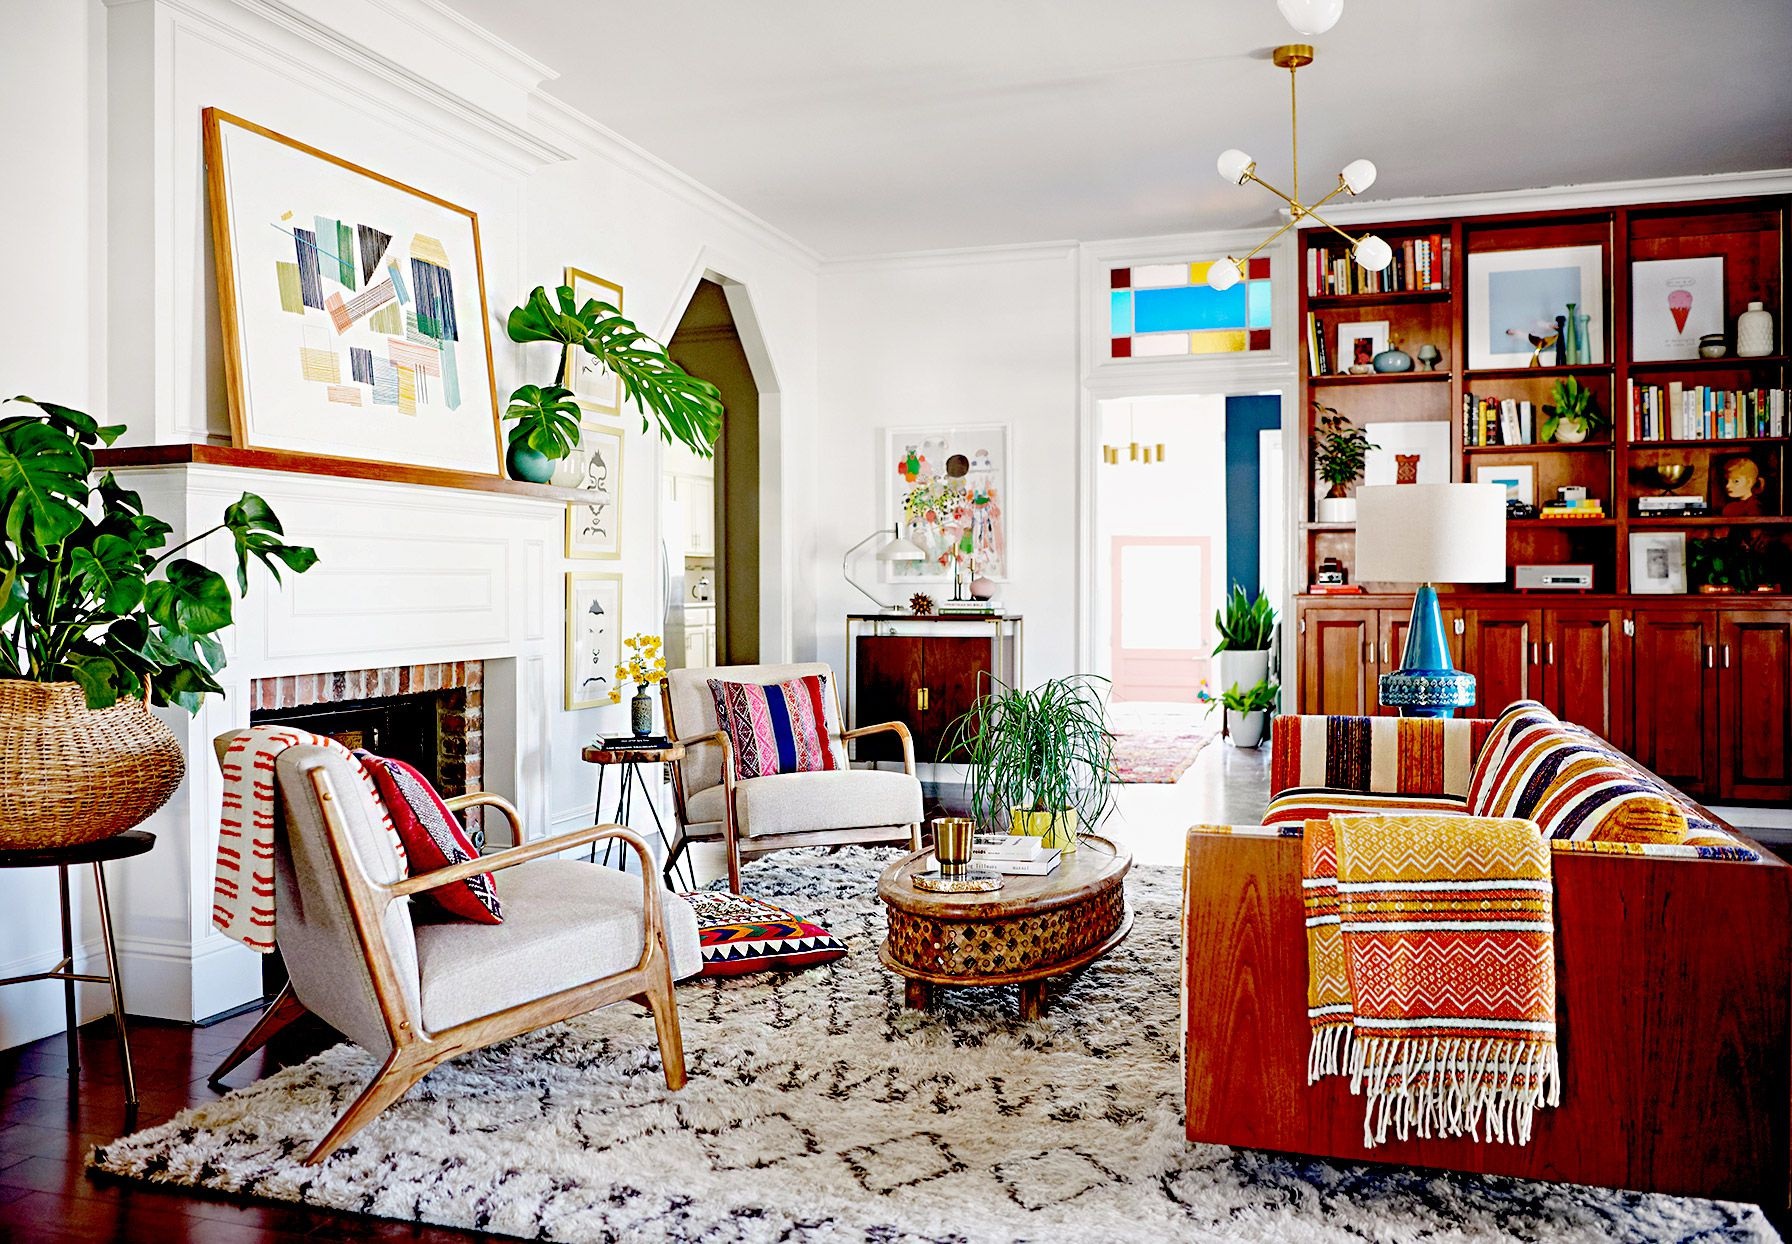 Want to know how to upgrade your living room with some decor ideas?